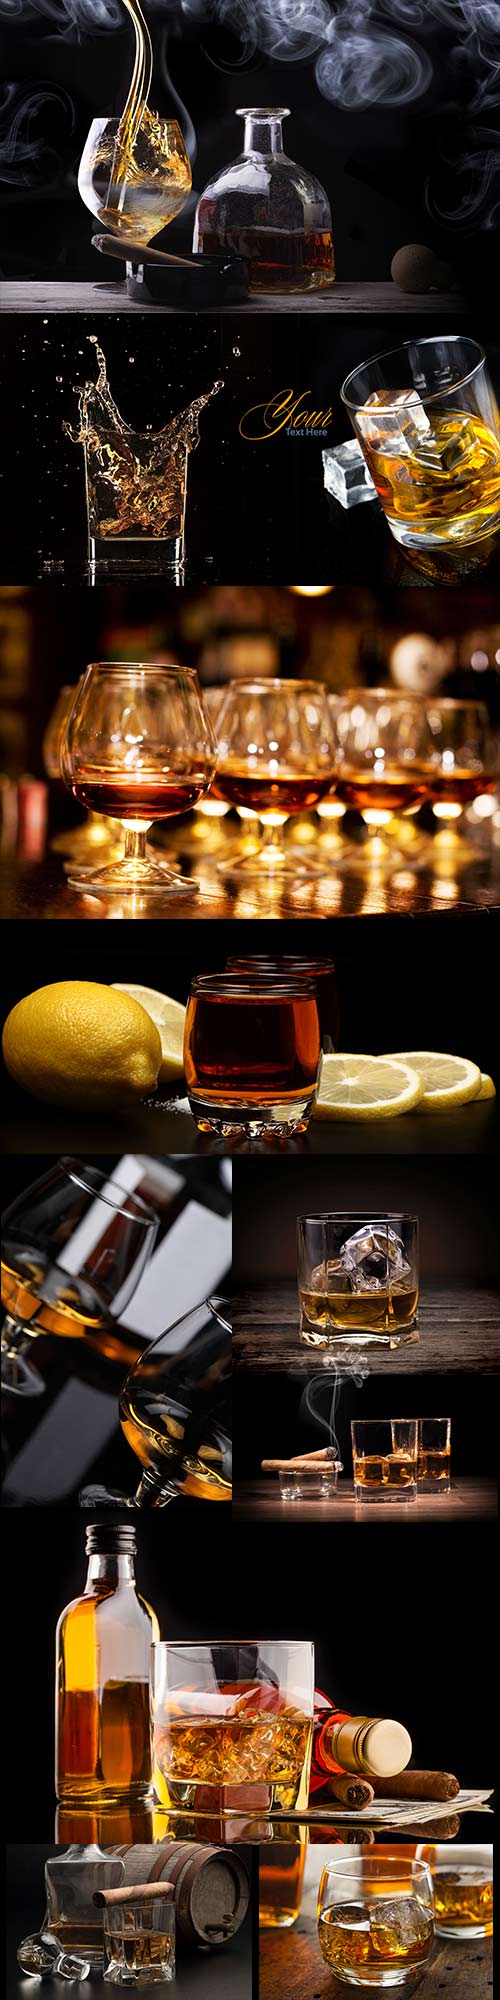 Strong drinks - Brandy and whiskey